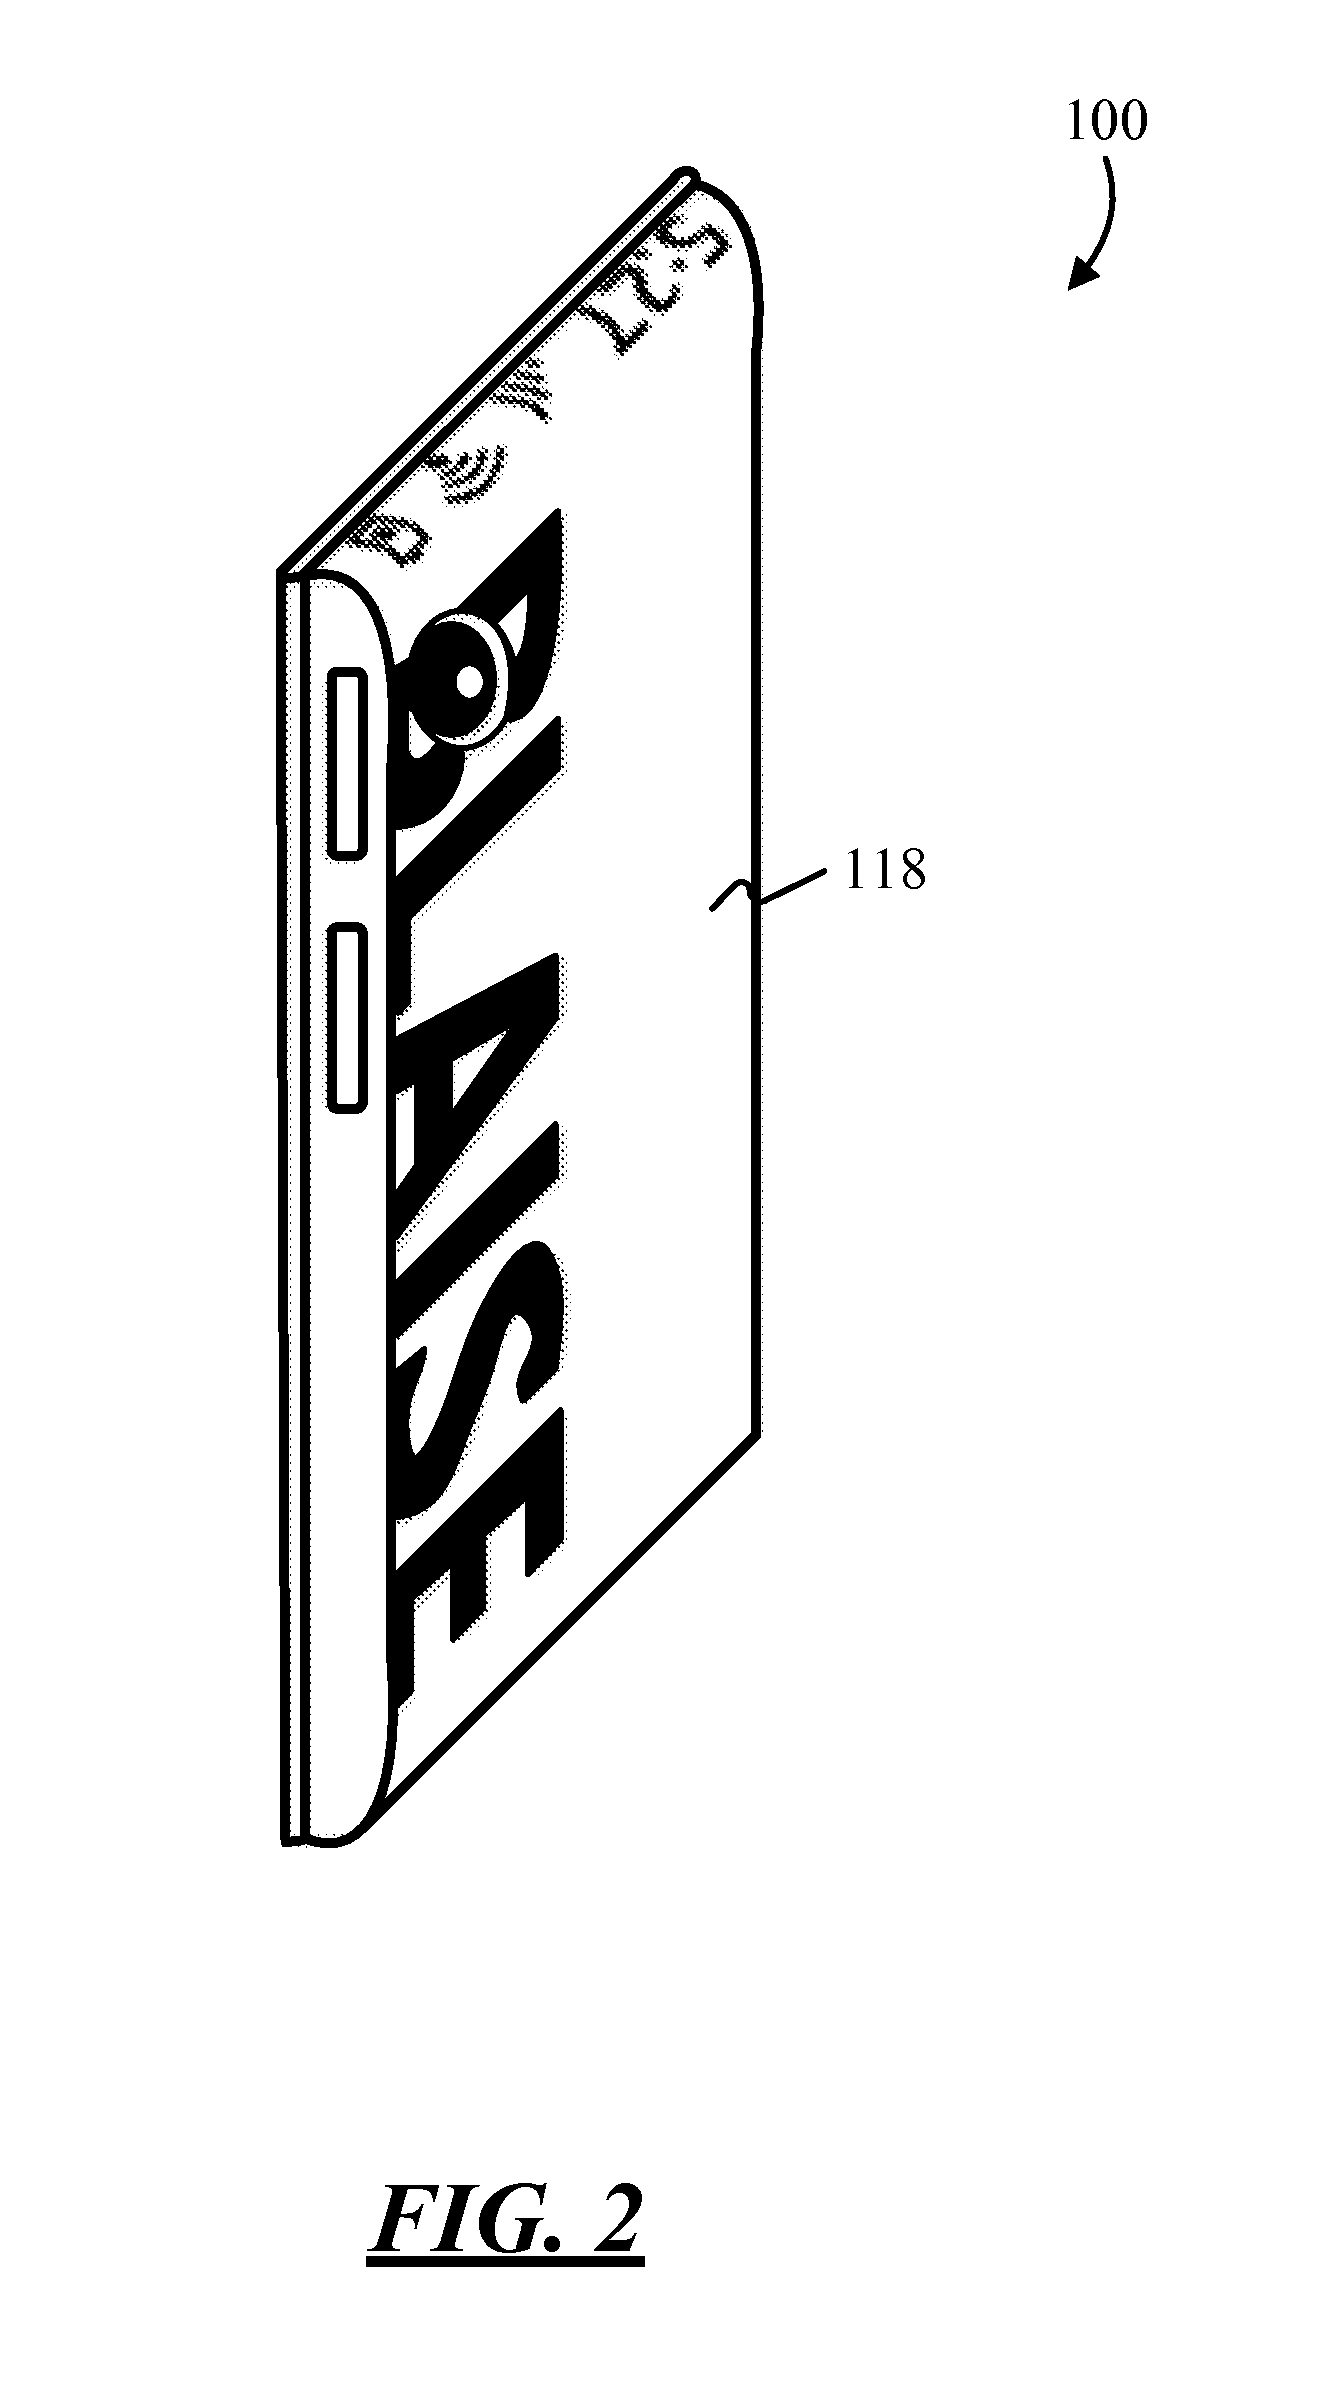 Use of low-power display on device